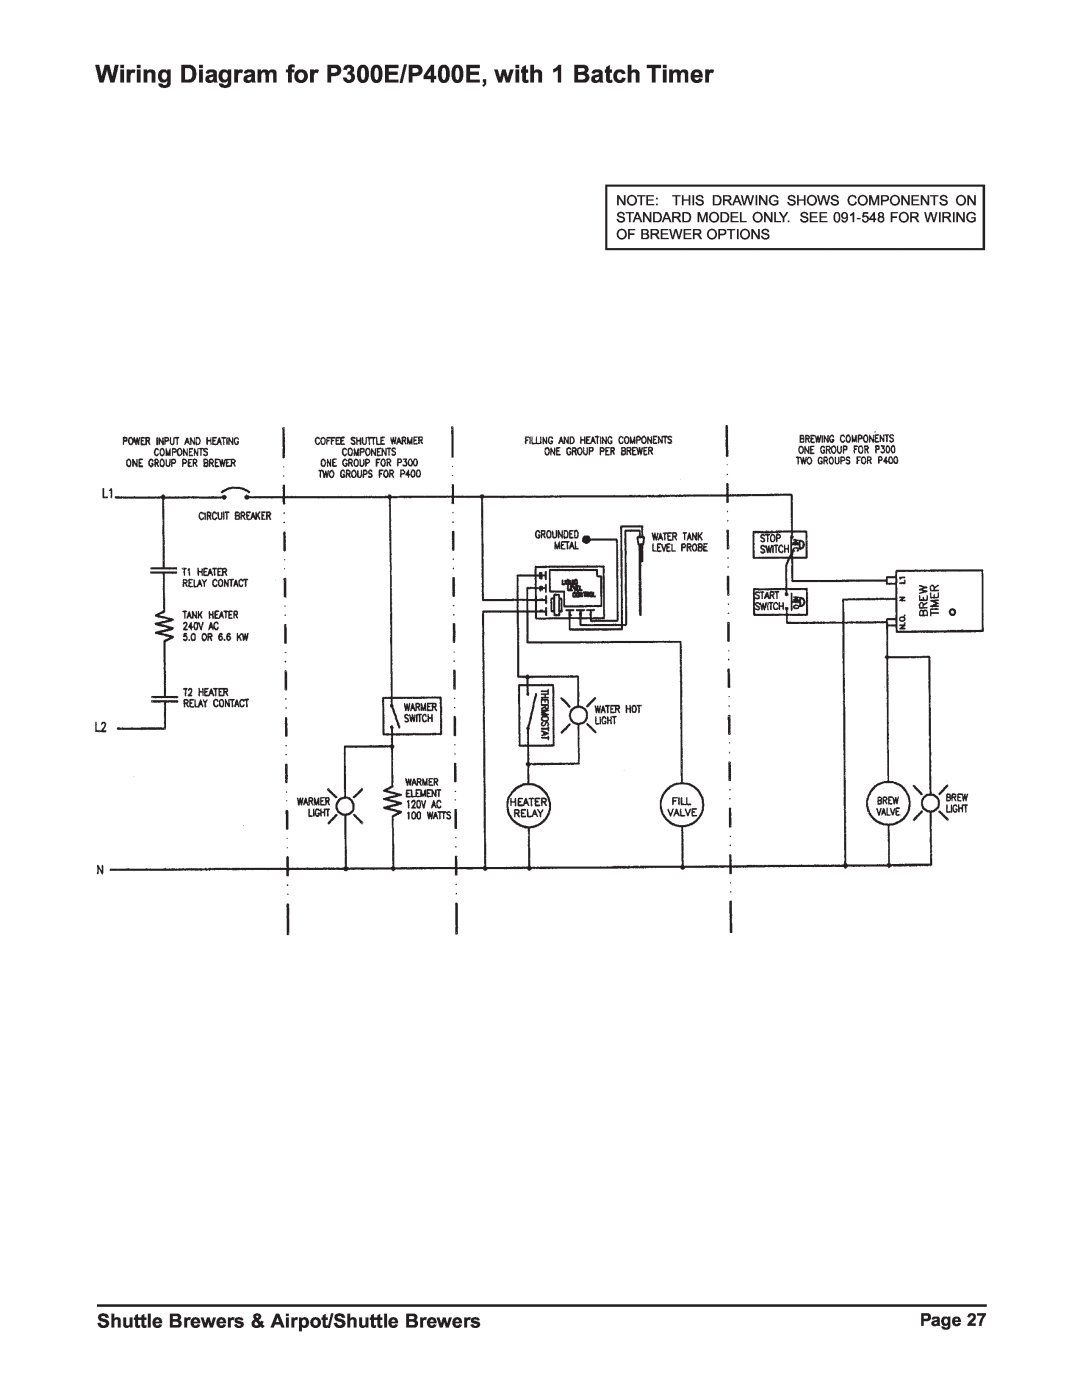 Grindmaster RAP400E Wiring Diagram for P300E/P400E, with 1 Batch Timer, Shuttle Brewers & Airpot/Shuttle Brewers, Page 